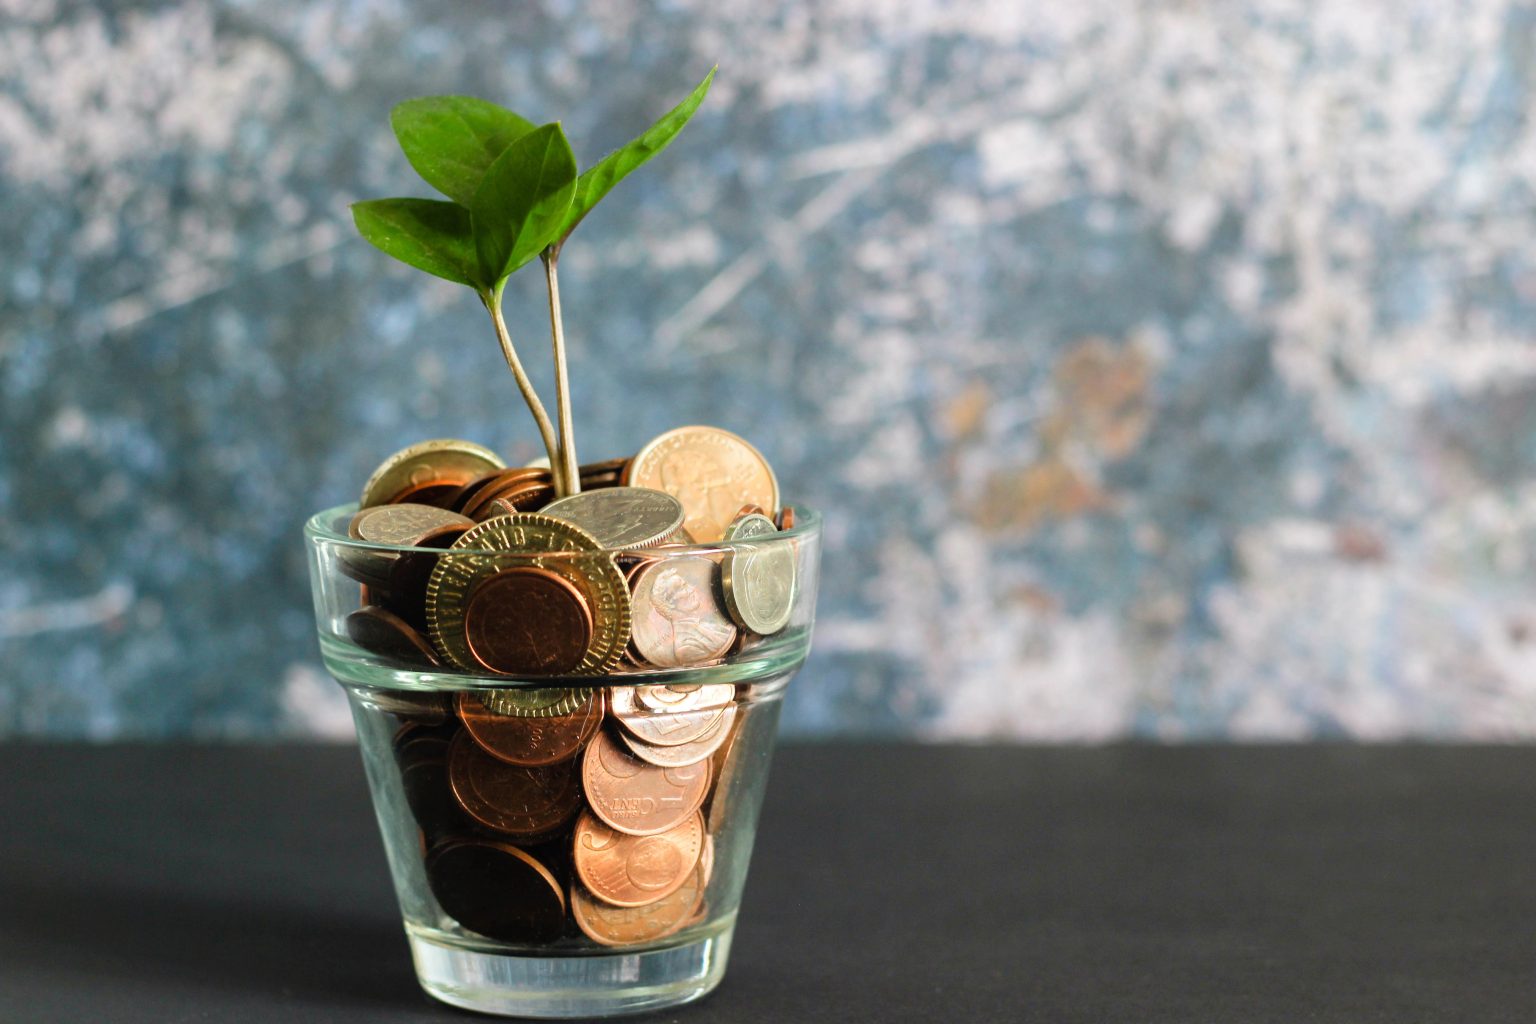 Image of money in a glass and a new green shoot growing from it.